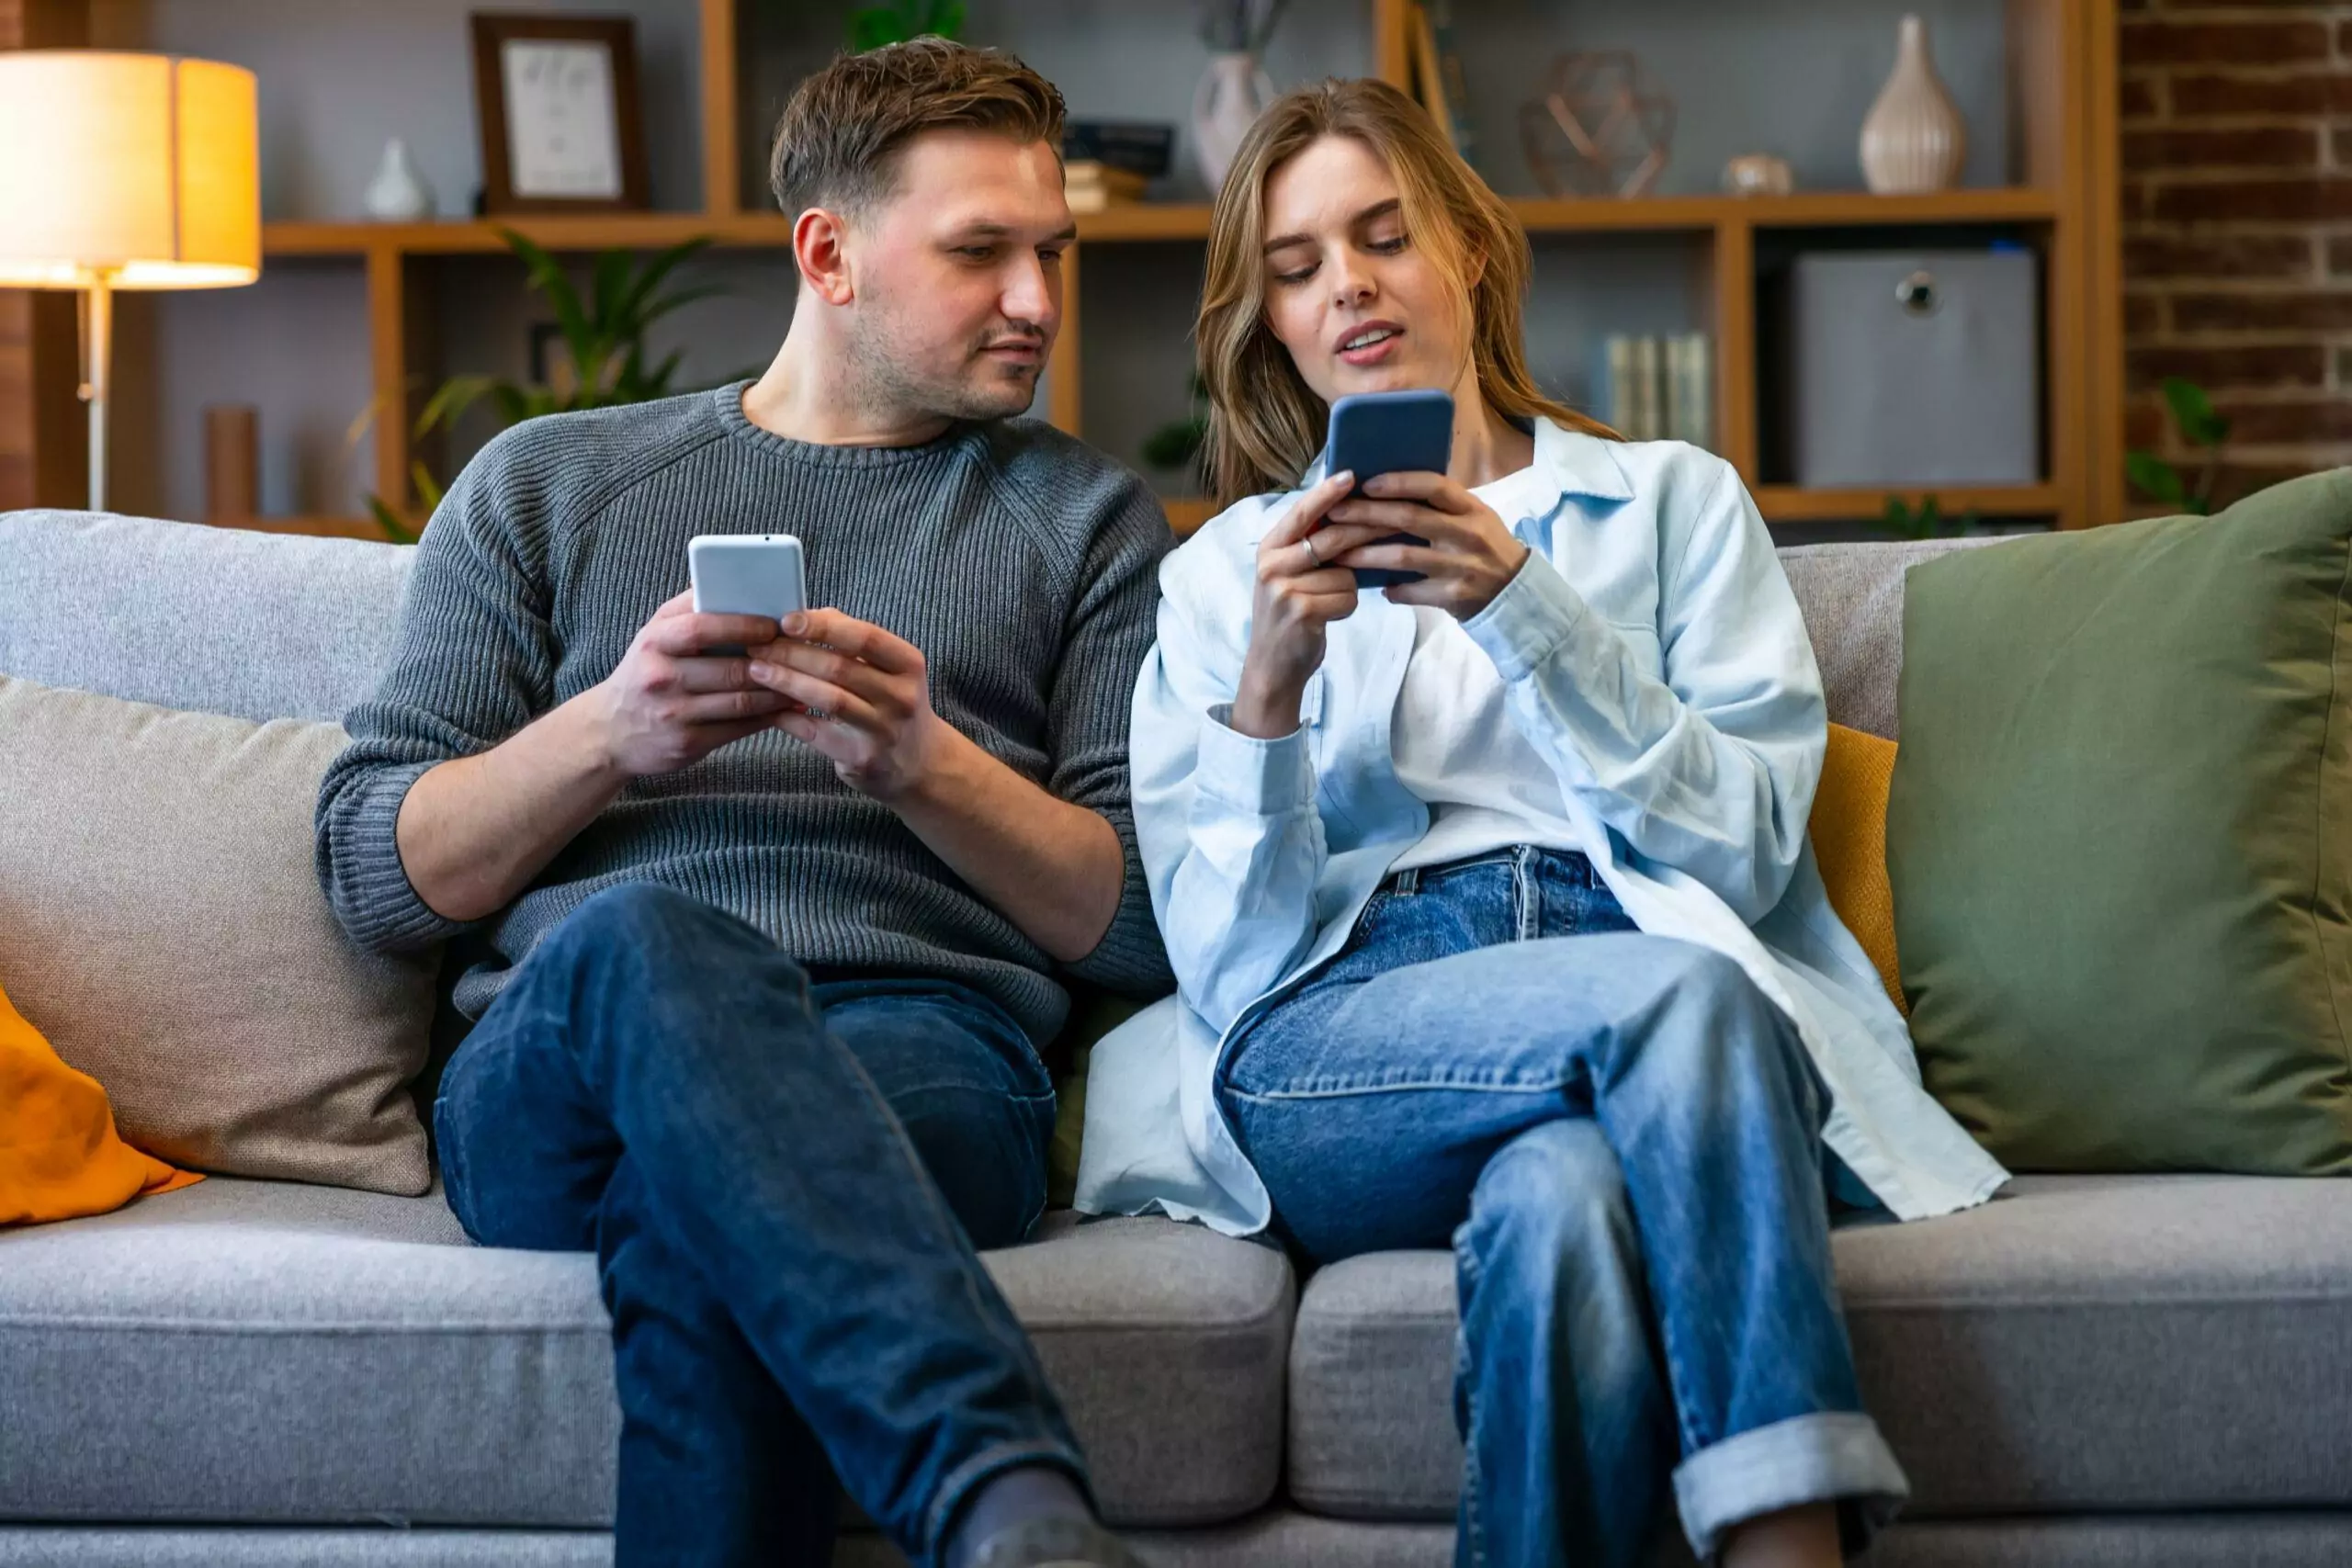 Young couple sitting on sofa holding smart phones